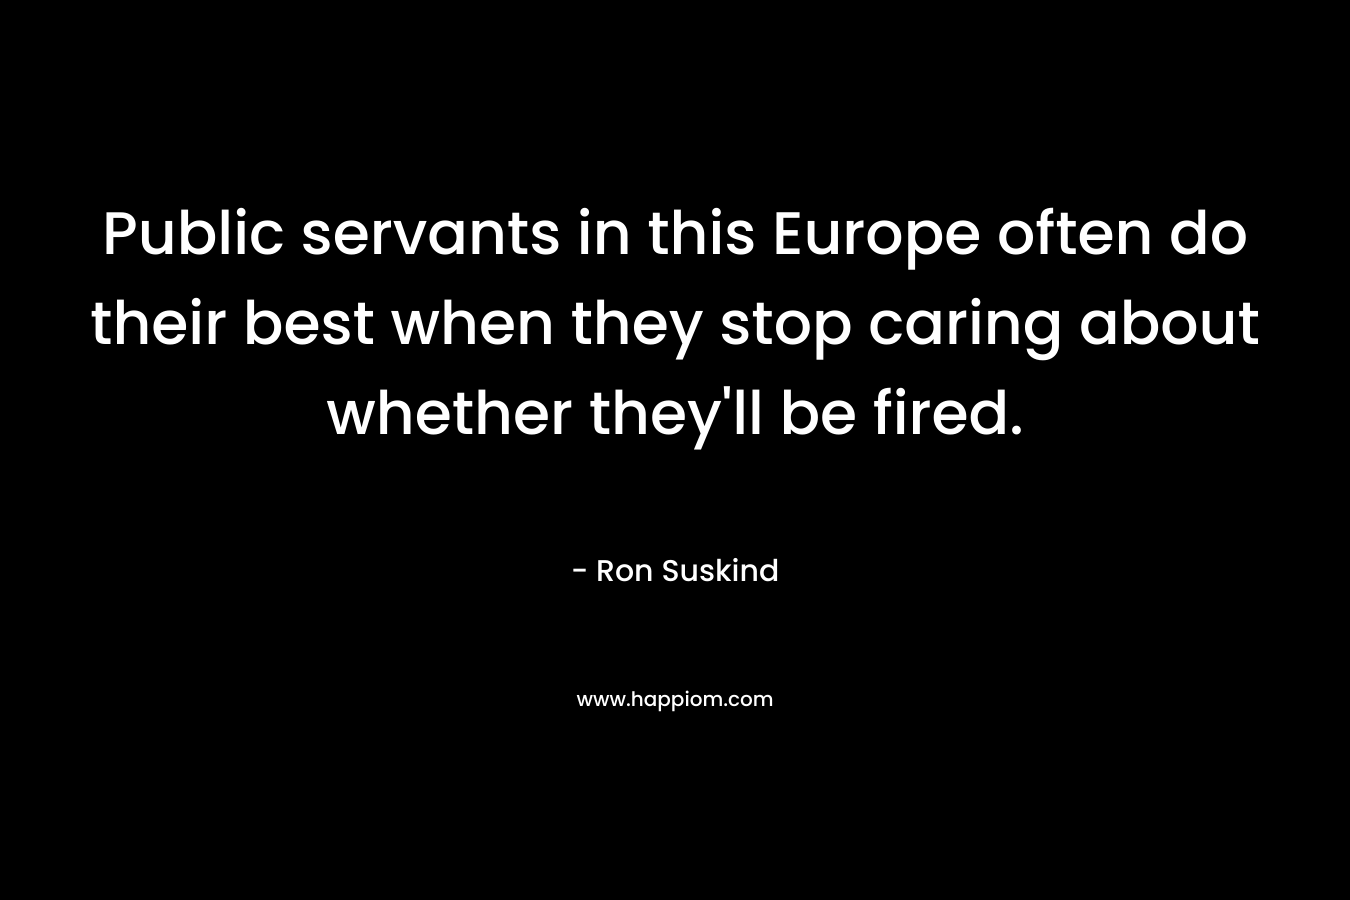 Public servants in this Europe often do their best when they stop caring about whether they'll be fired.